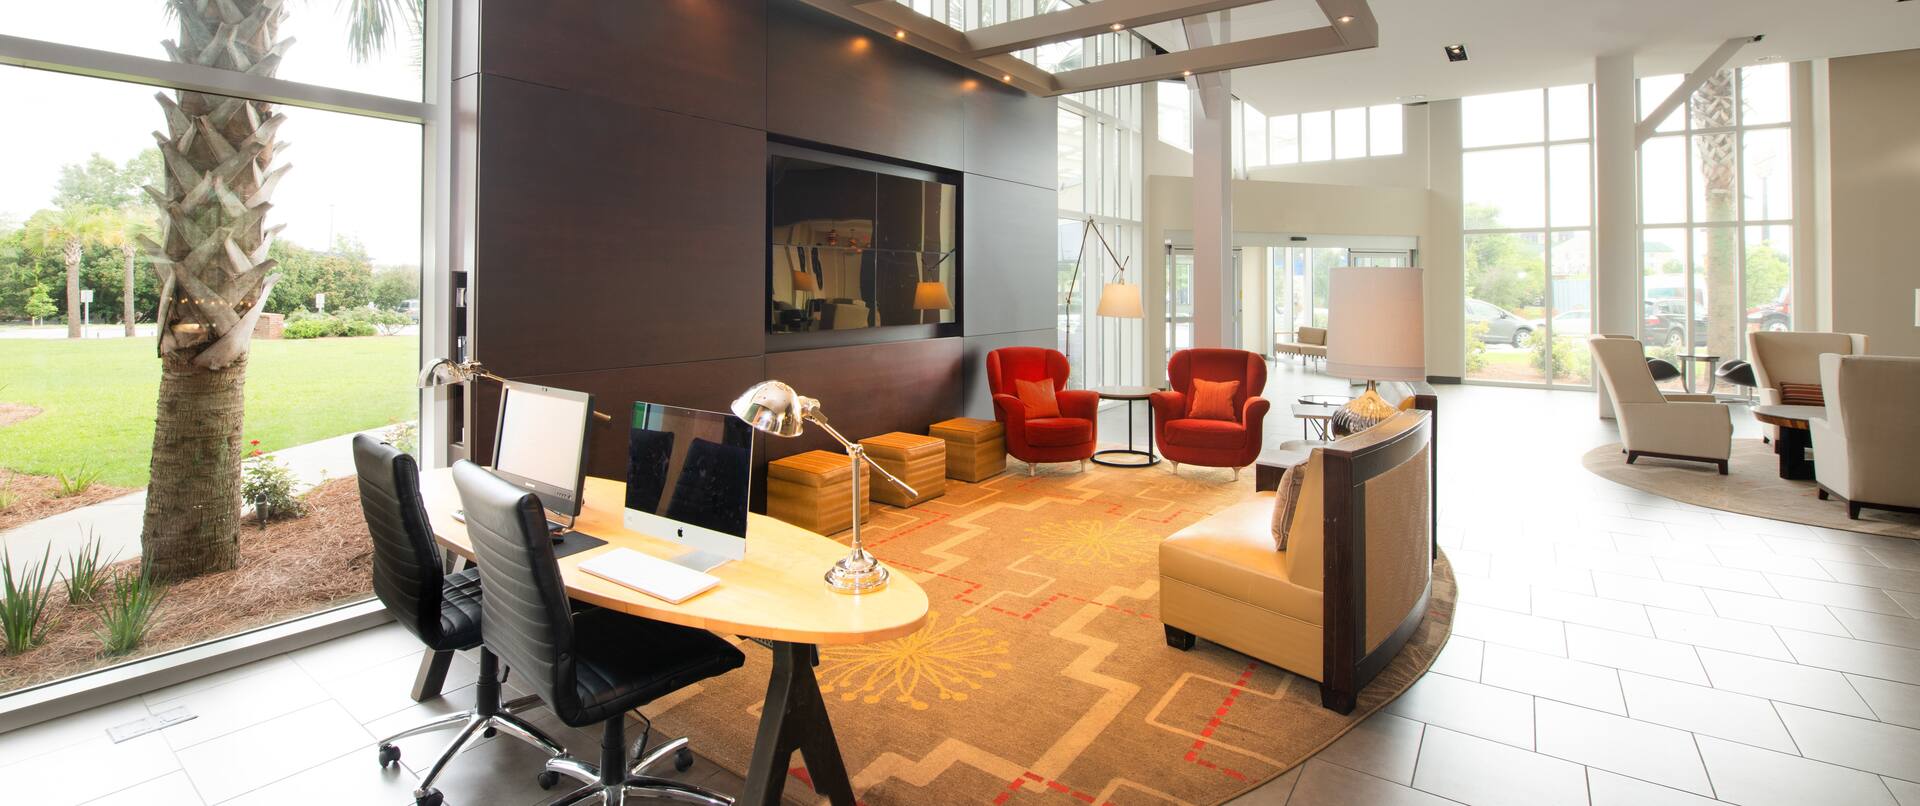 Business Center Computers in Lobby for Guests Use